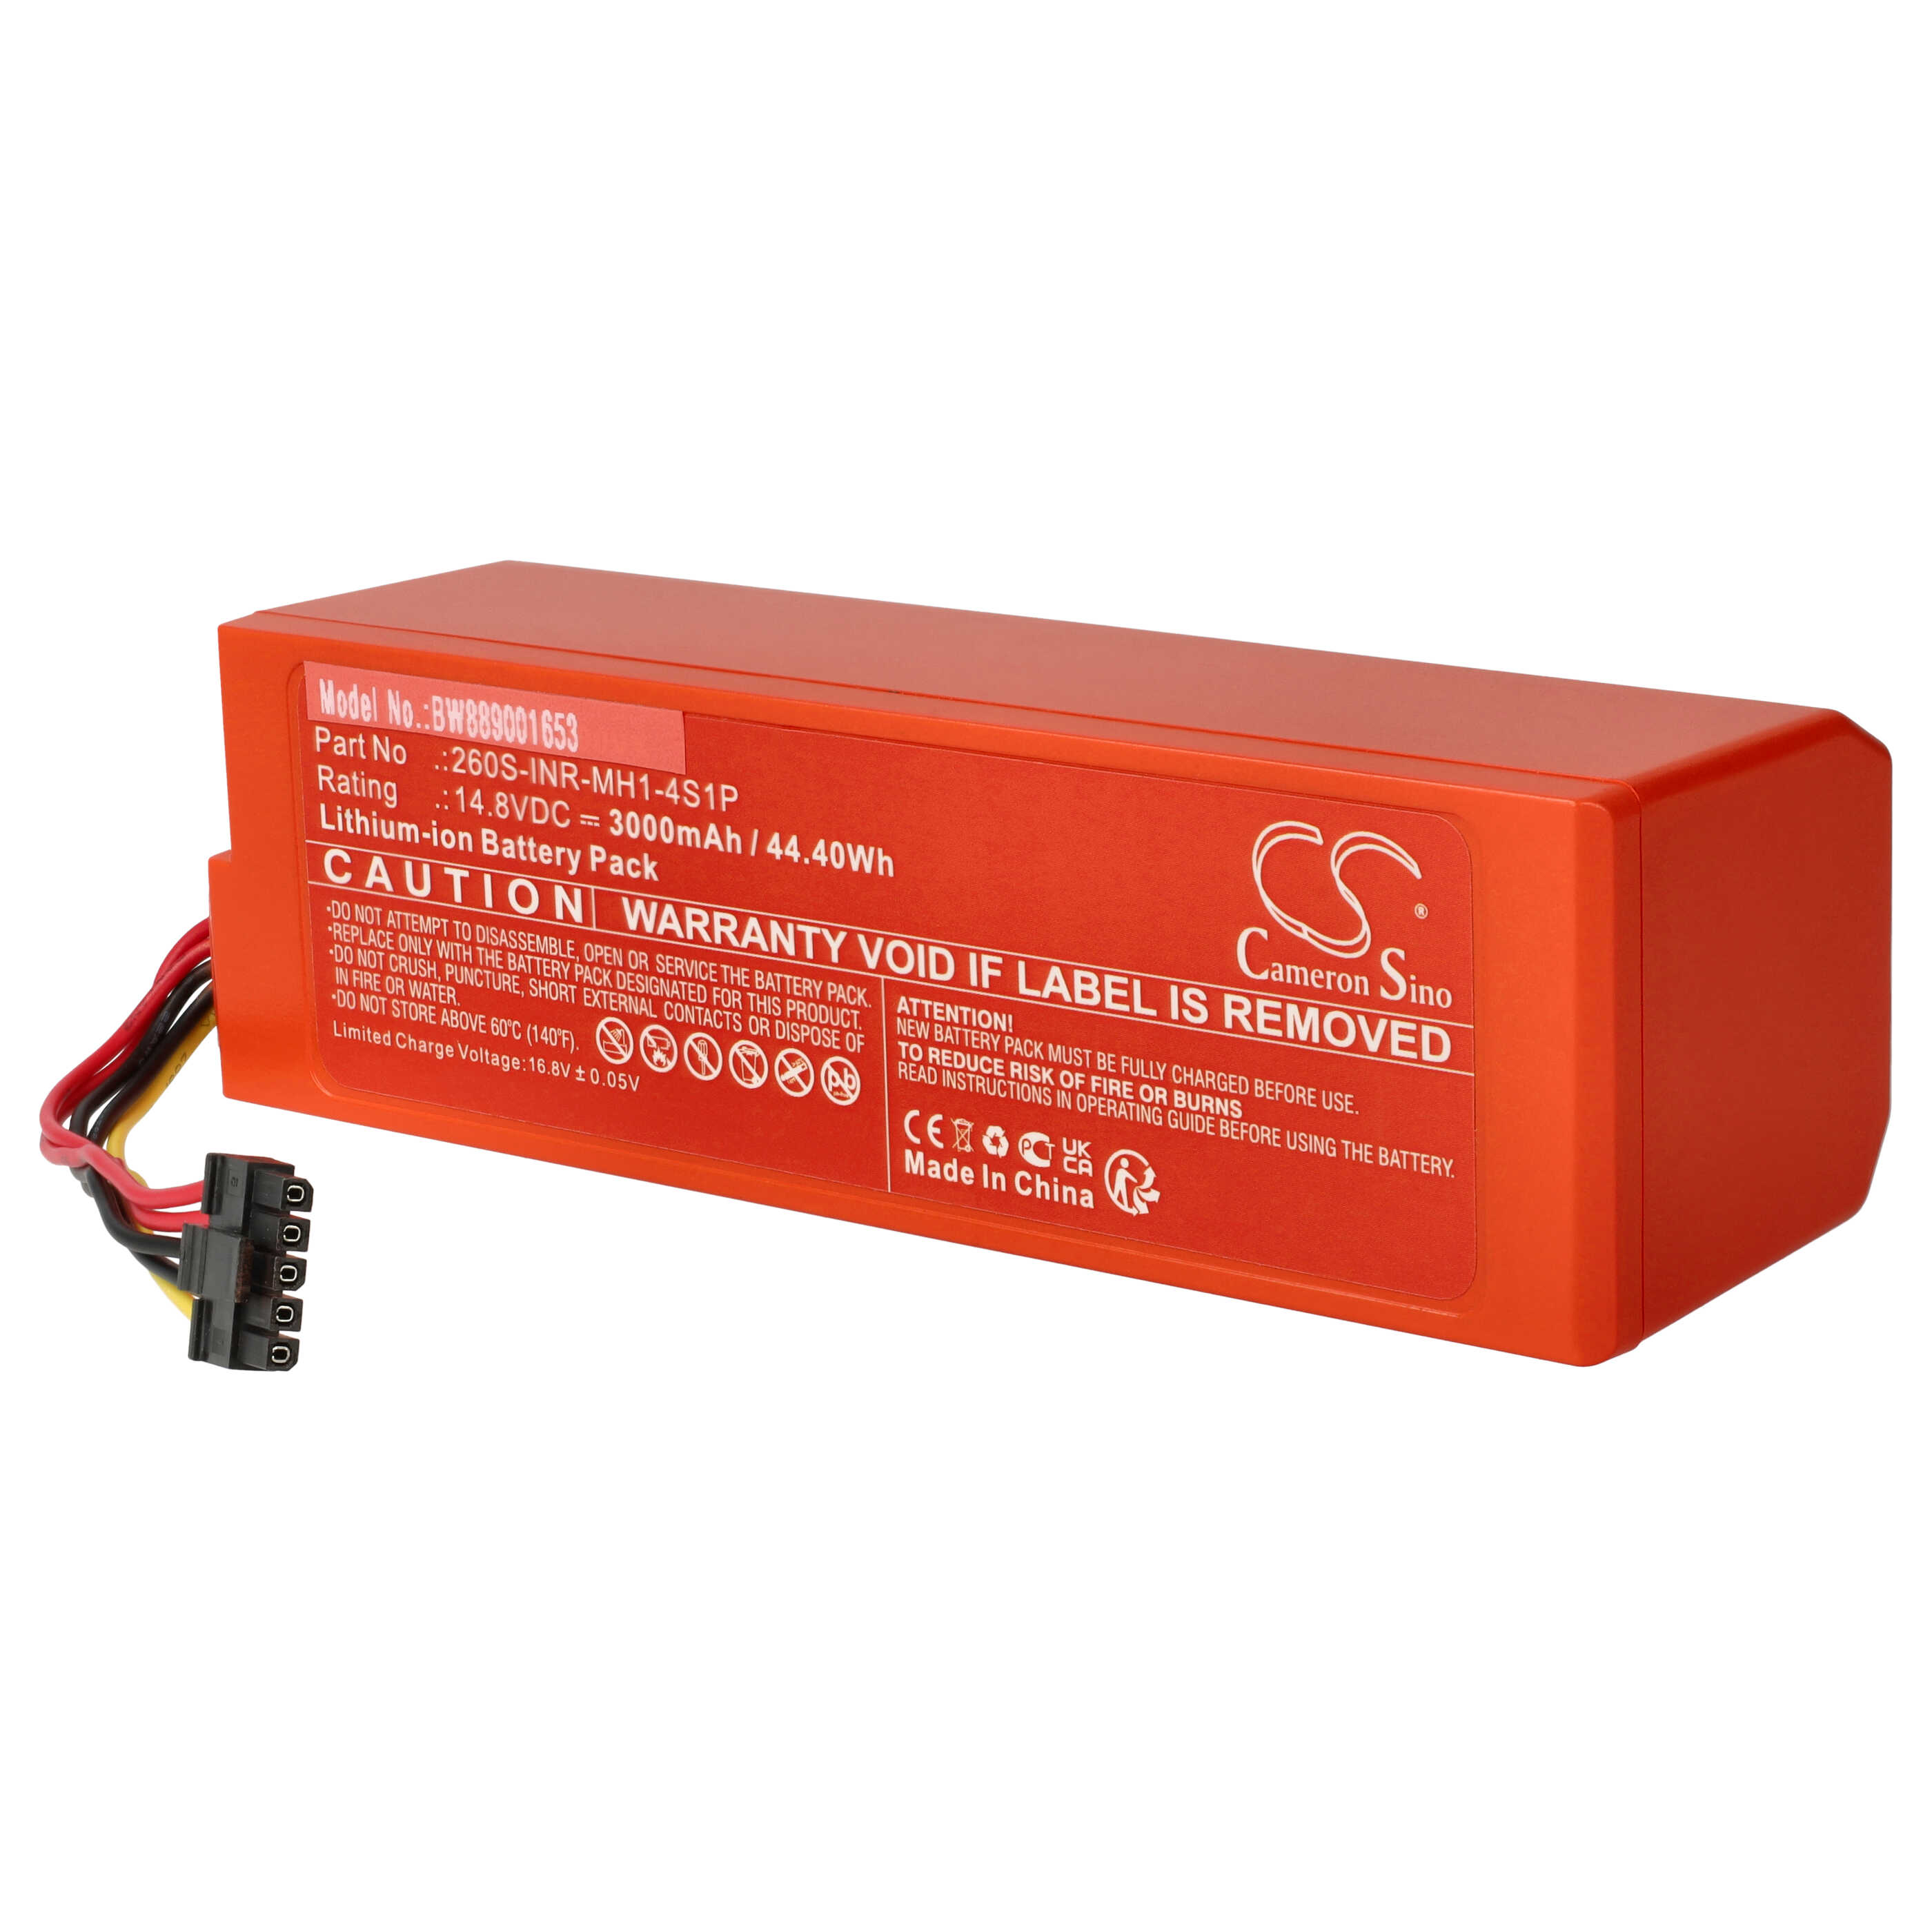 Battery Replacement for Xiaomi 260S-INR-MH1-4S1P for - 3200mAh, 14.8V, Li-Ion